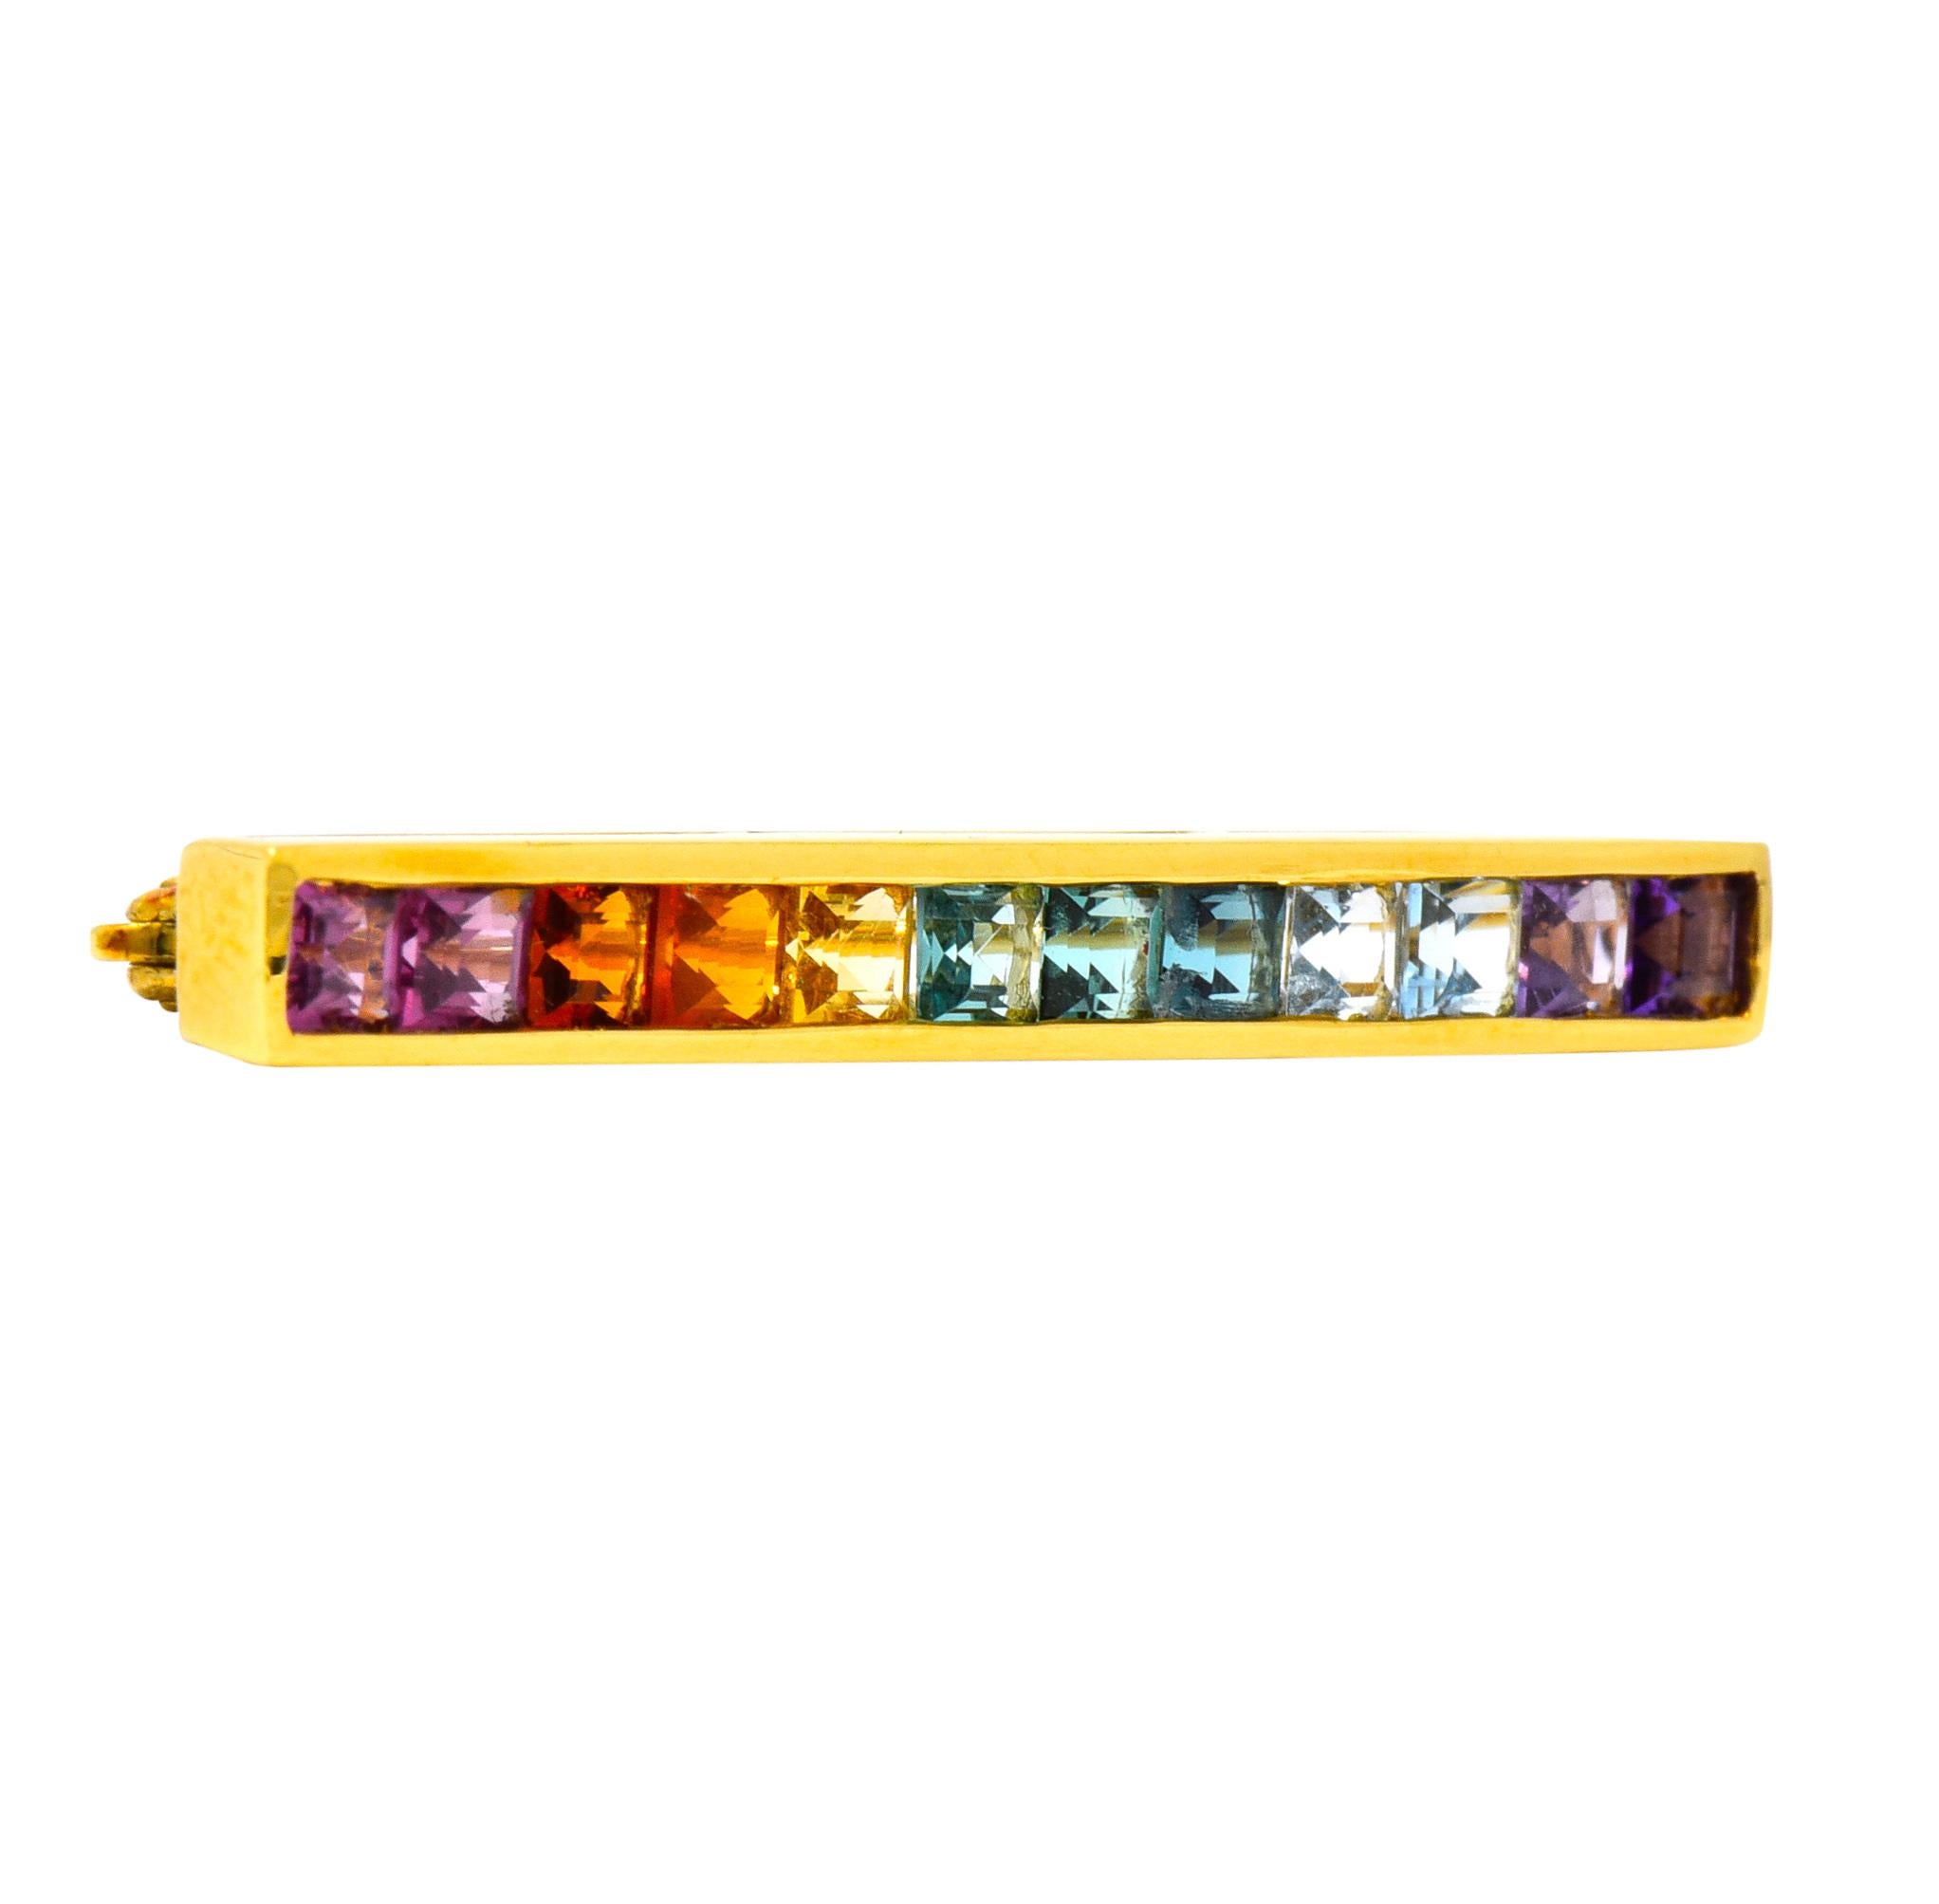 Brooch designed as channel set bar with high polished gold surround

Featuring square cut gemstones of amethyst, aquamarine, citrine, tourmaline, and others

Completed by pin stem and locking closure

Stamped T & Co. and 18k for Tiffany & Co. and 18